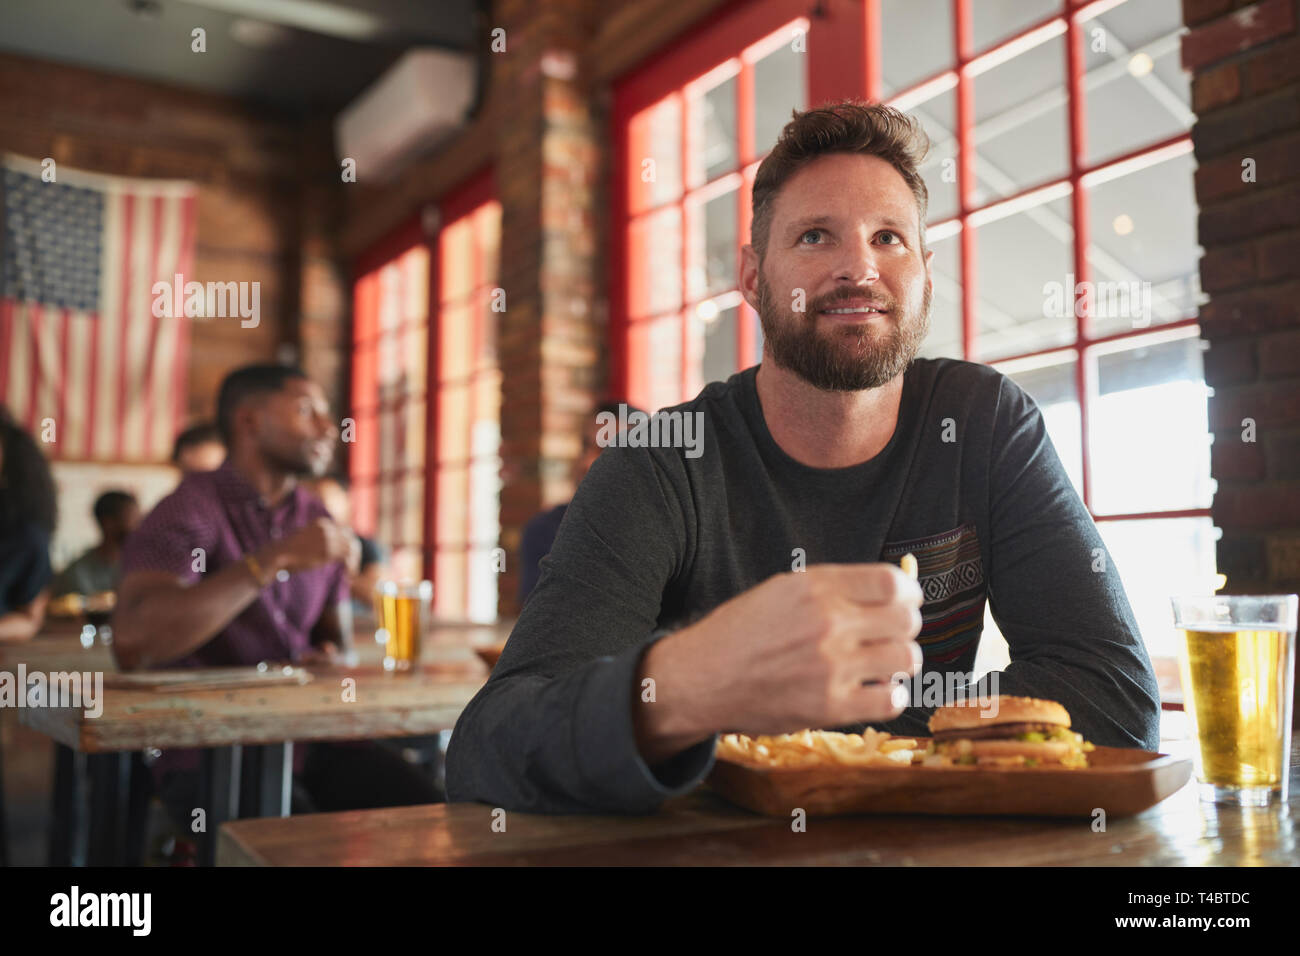 Man Watching Game On Screen In Sports Bar Eating Burger And Fries Stock Photo